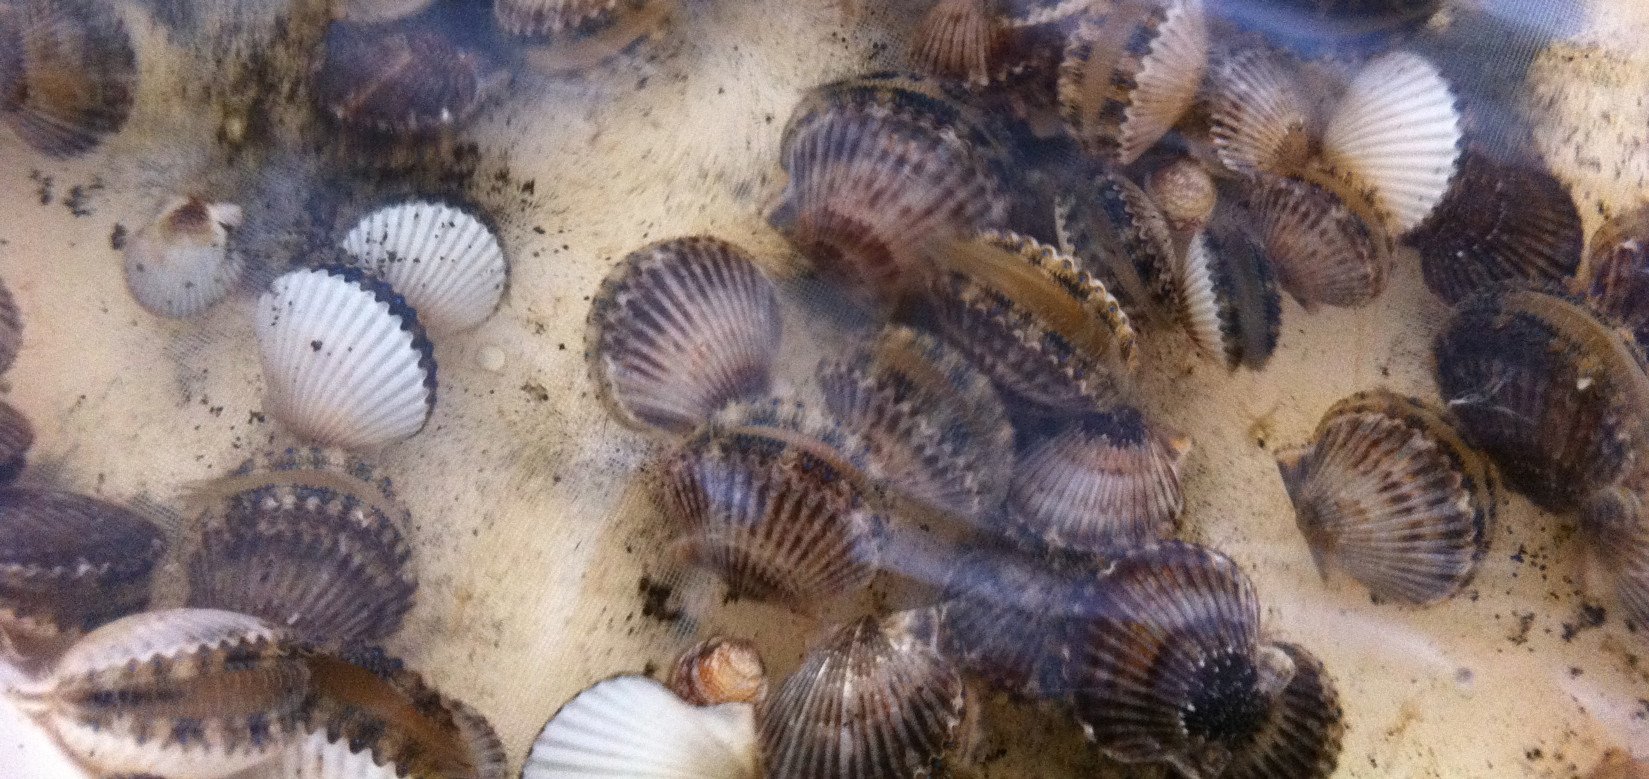 BAY SHELLFISH.      .        JUVENILE SCALLOPS

AVAILABLE EVERY FALL

FLORIDA BAY SCALLOPS WERE COMMERCIALLY HARVESTED UNITL A MORATORIUM IN 1994
FRESH (NOT FROZEN) BAY SCALLOP MEAT HAS BEEN A LONG ESTABLISHED AND HIGH VALUE MARKET IN THE U.S.
A NICHE MARKET FOR A LIVE WHOLE SCALLOP ALSO EXISTS
